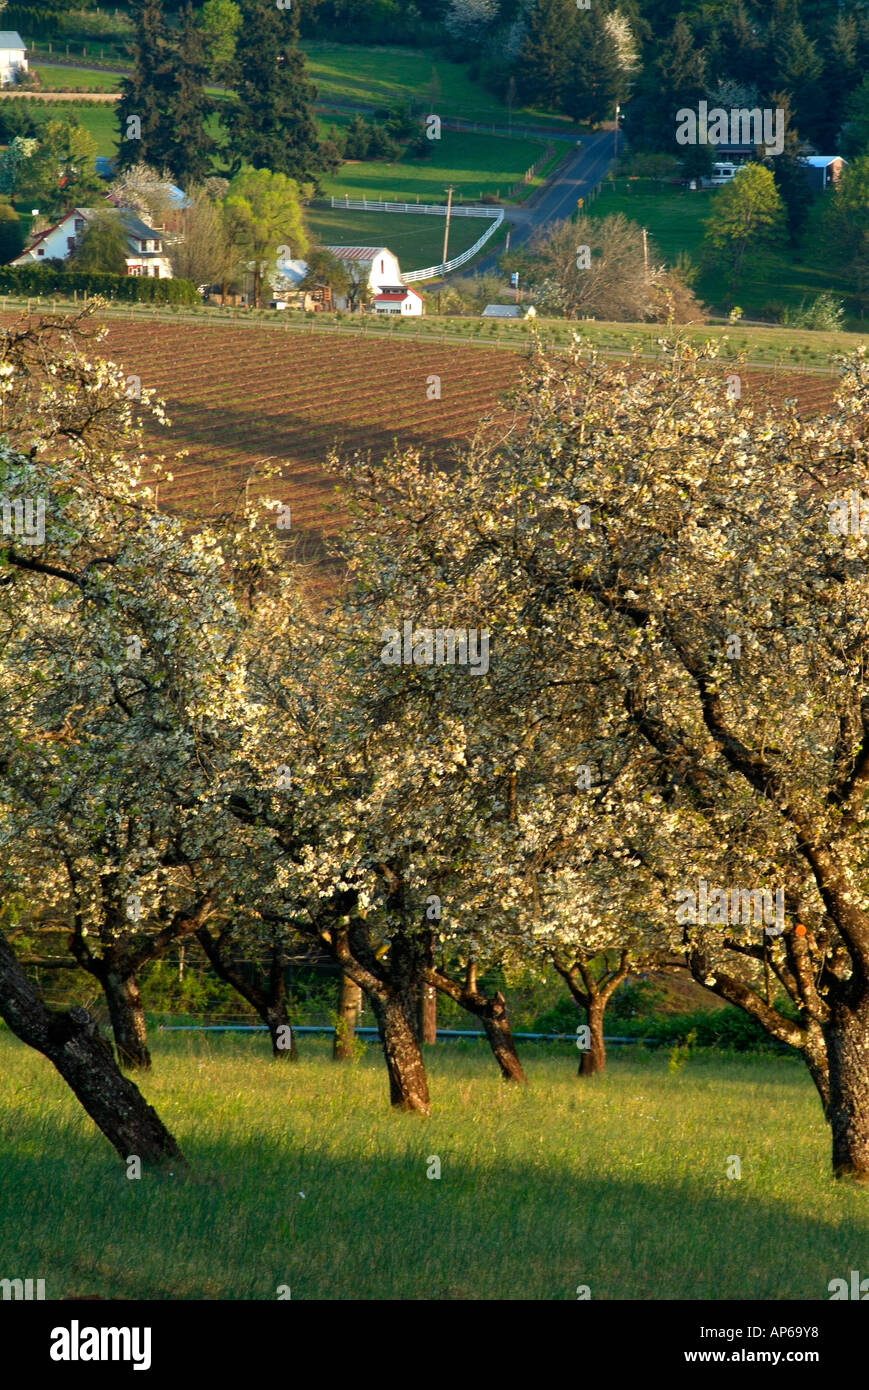 Spring orchard on Quarry Road, vineyard on Old Parrett Mtn. Road behind, Willamette Valley, Oregon Stock Photo